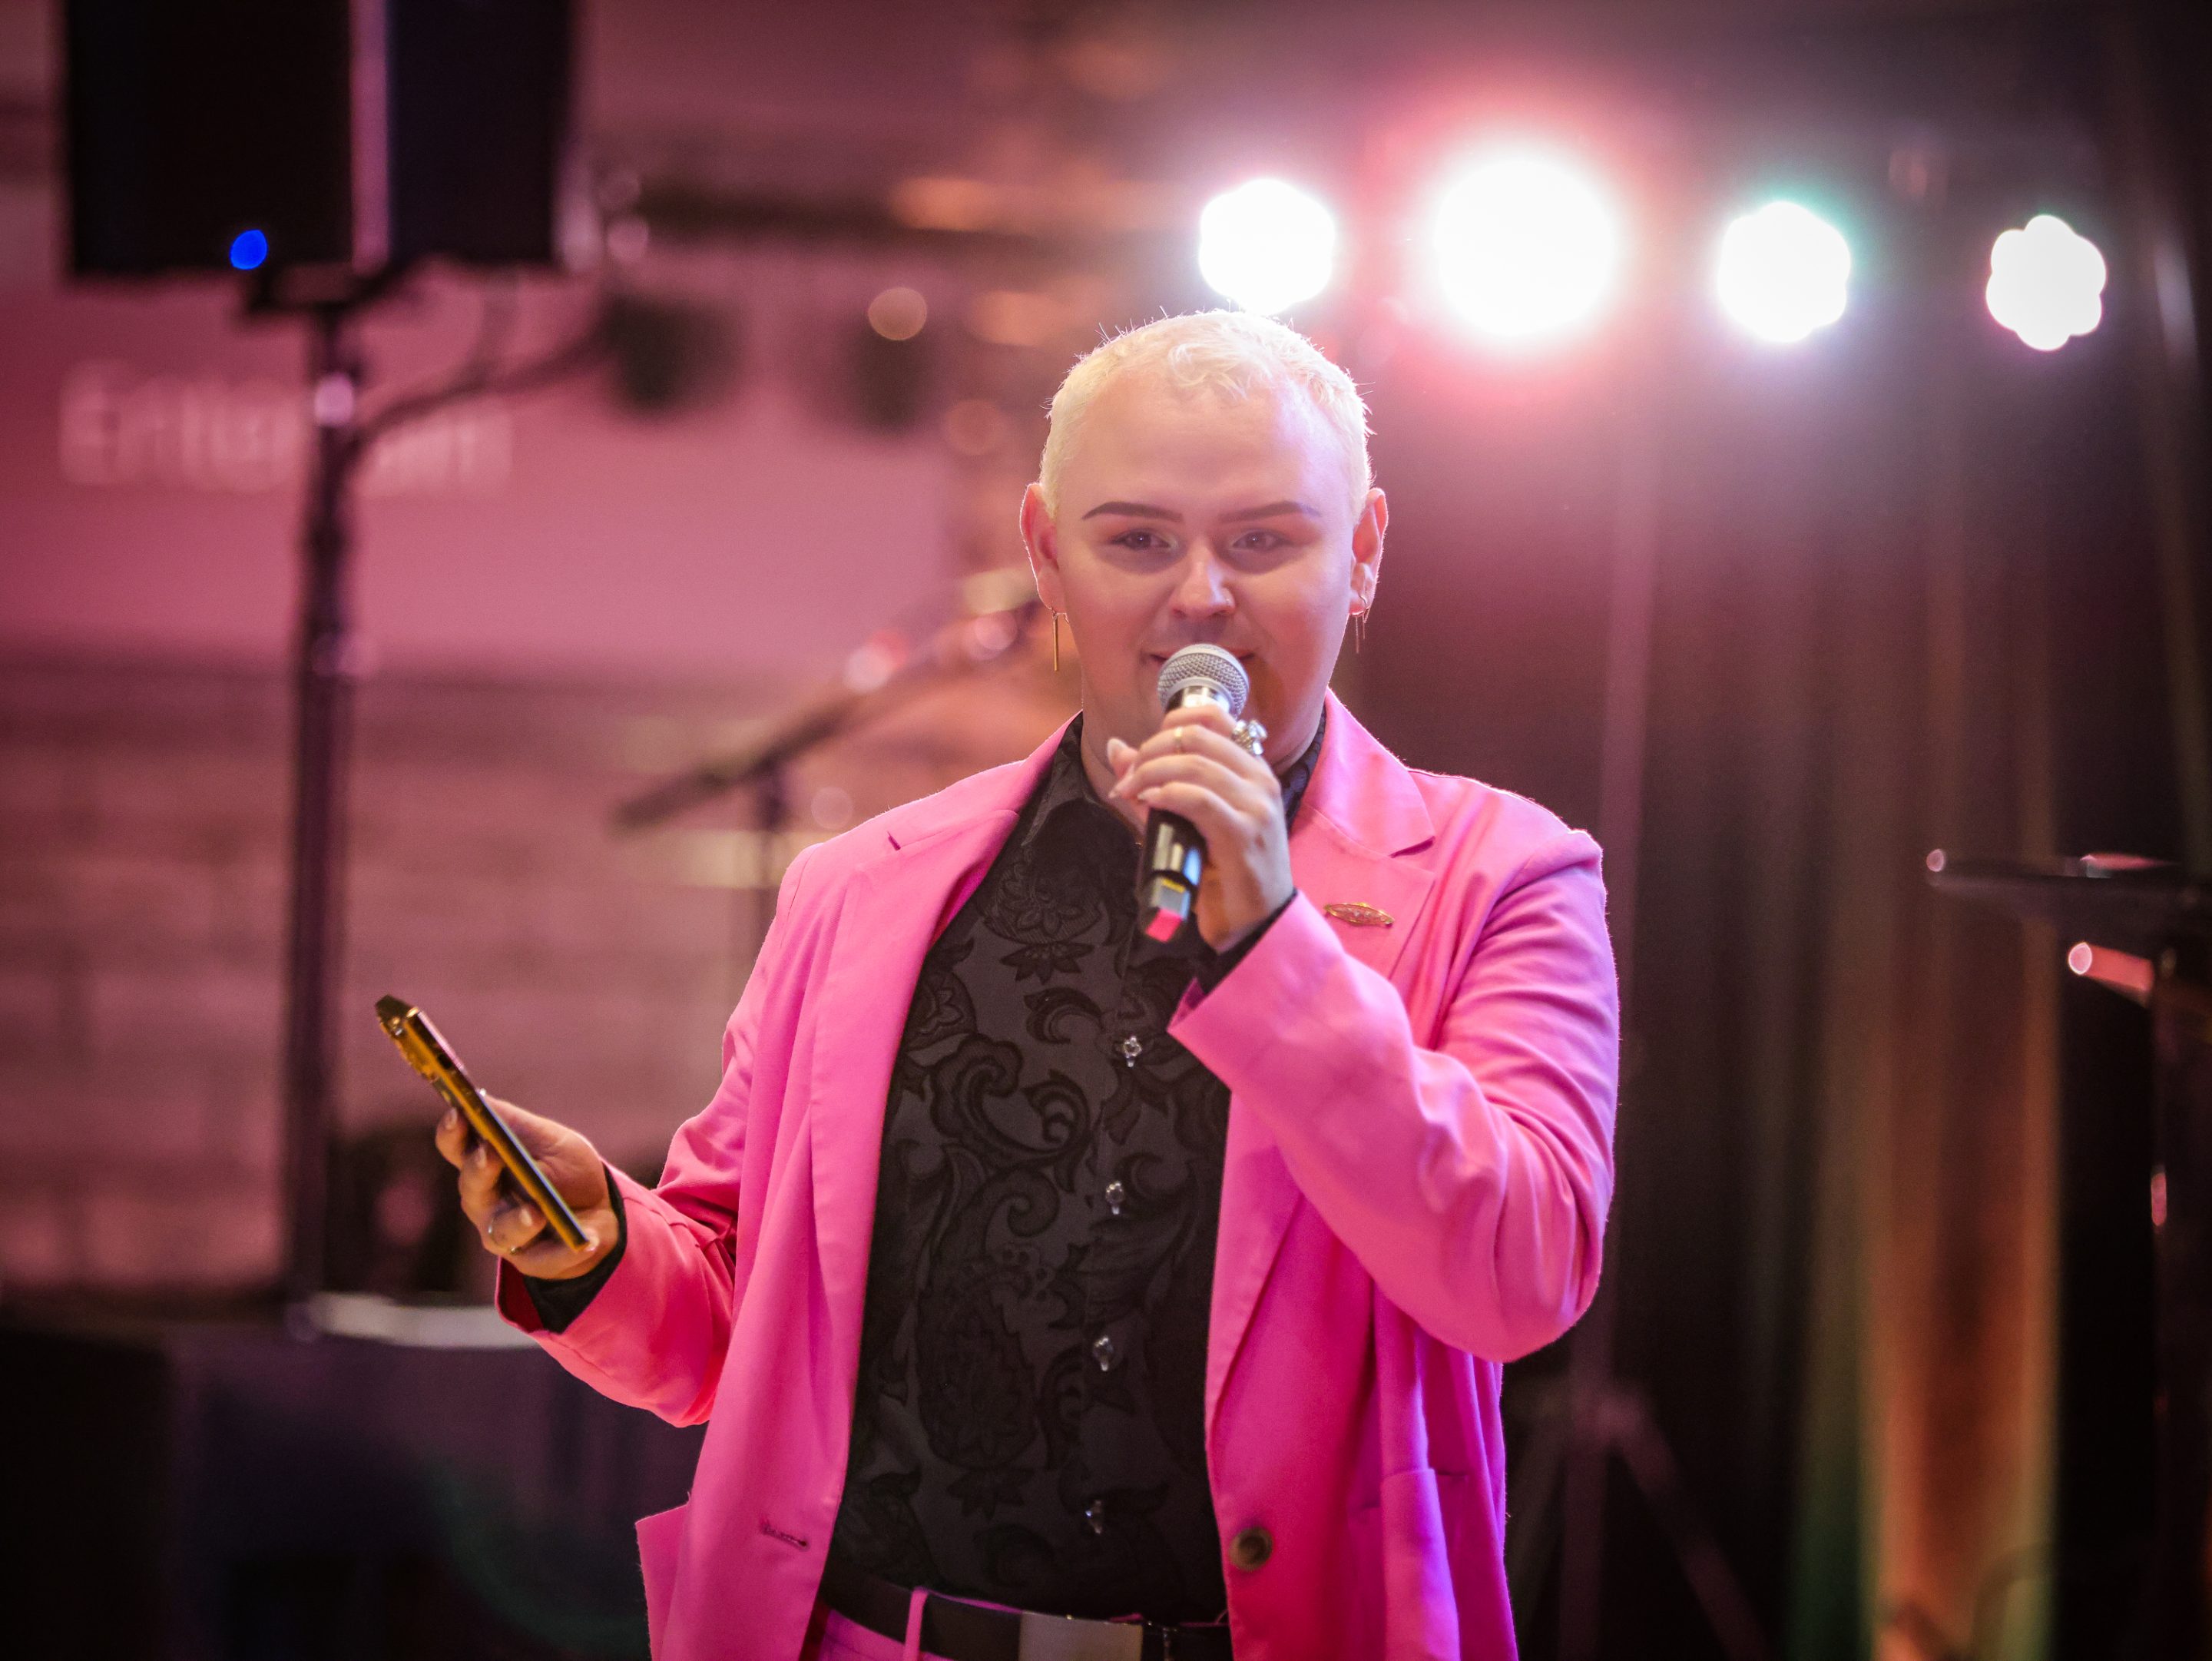 A man in a pink suit, representing The LIME Foundation of Santa Rosa, confidently holds a microphone.